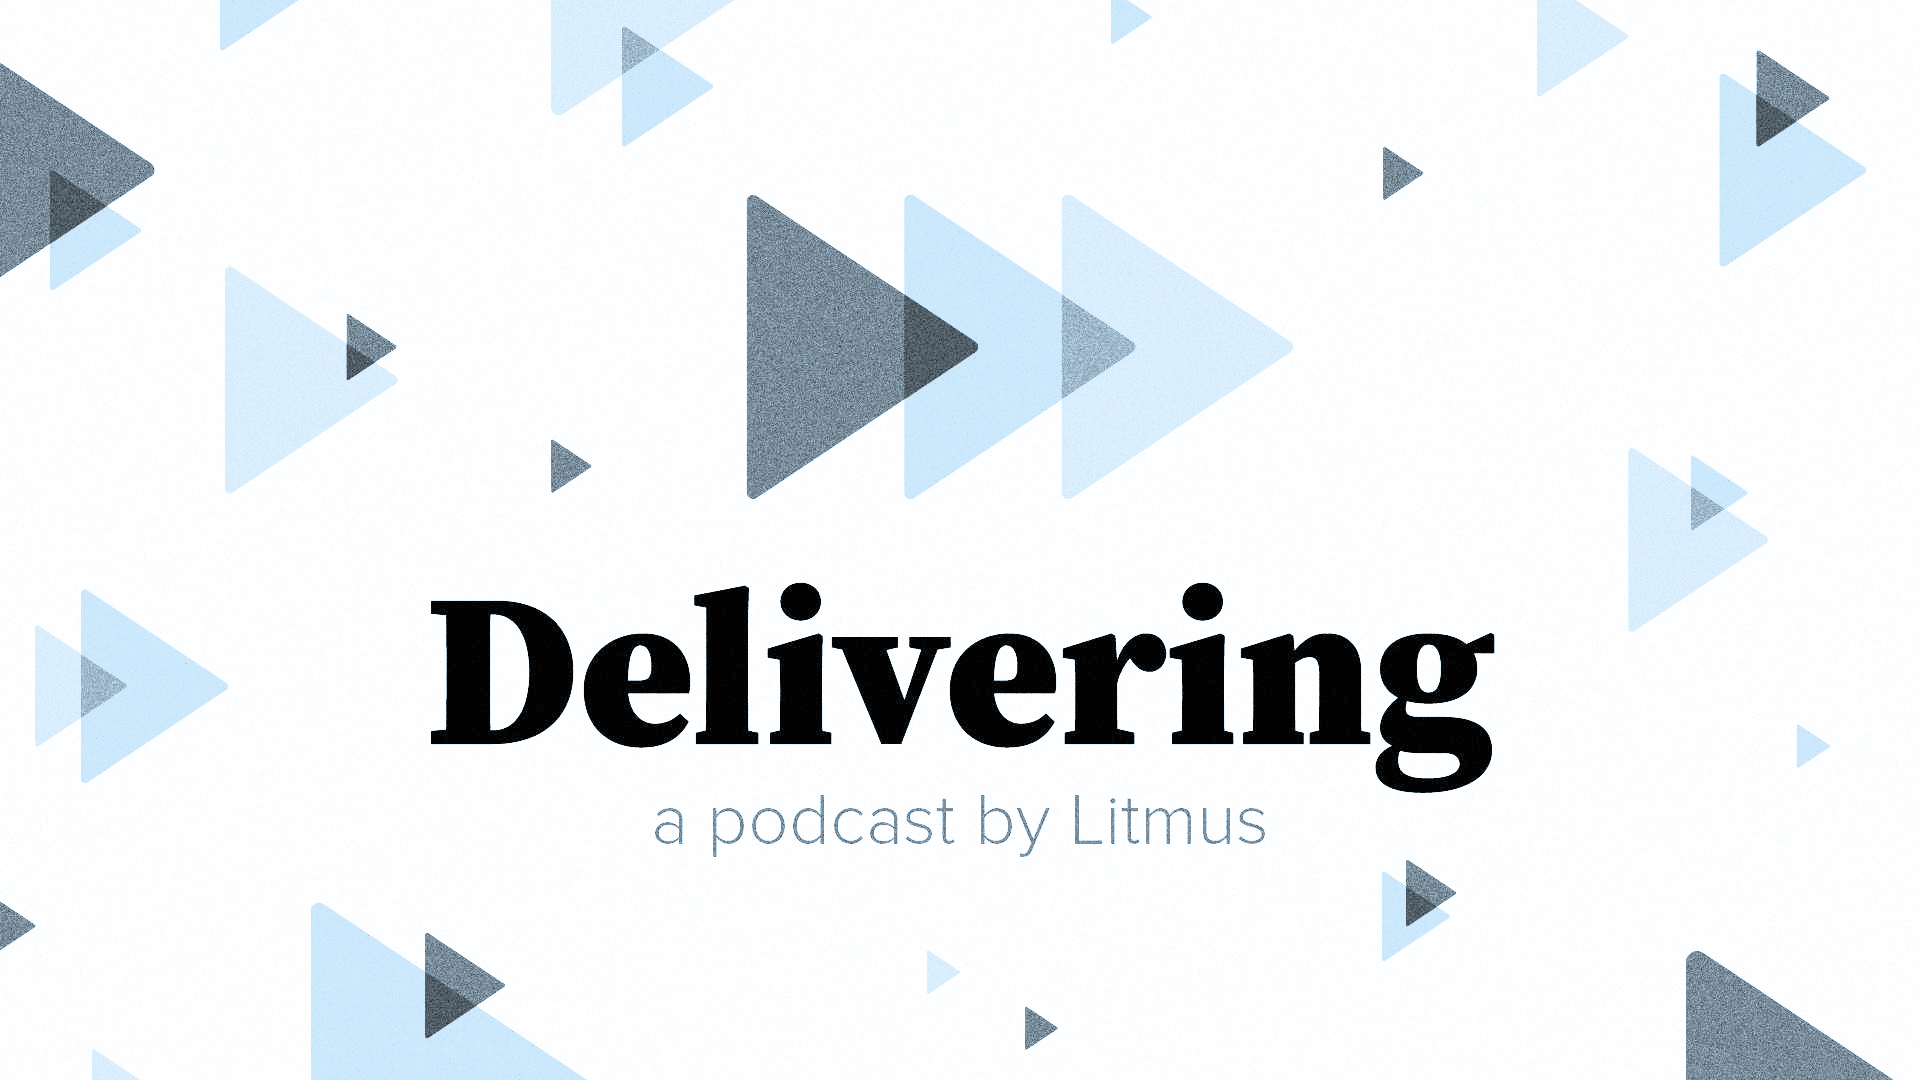 The cover art for the Delivering podcast.